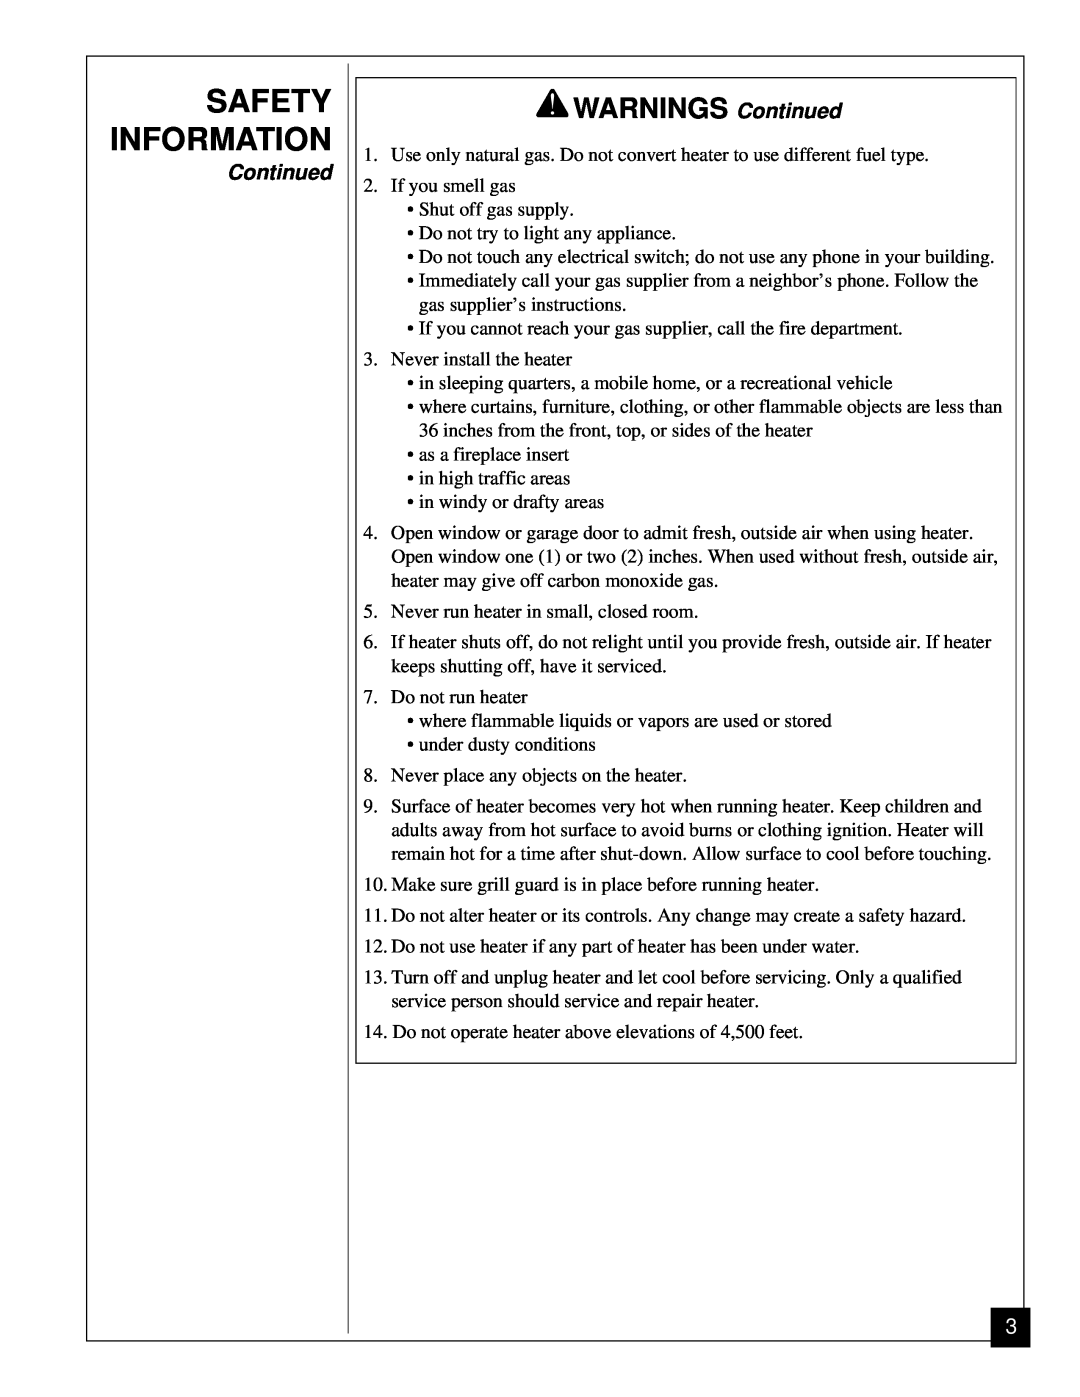 Vanguard Heating VGN30 installation manual Safety Information, WARNINGS Continued 